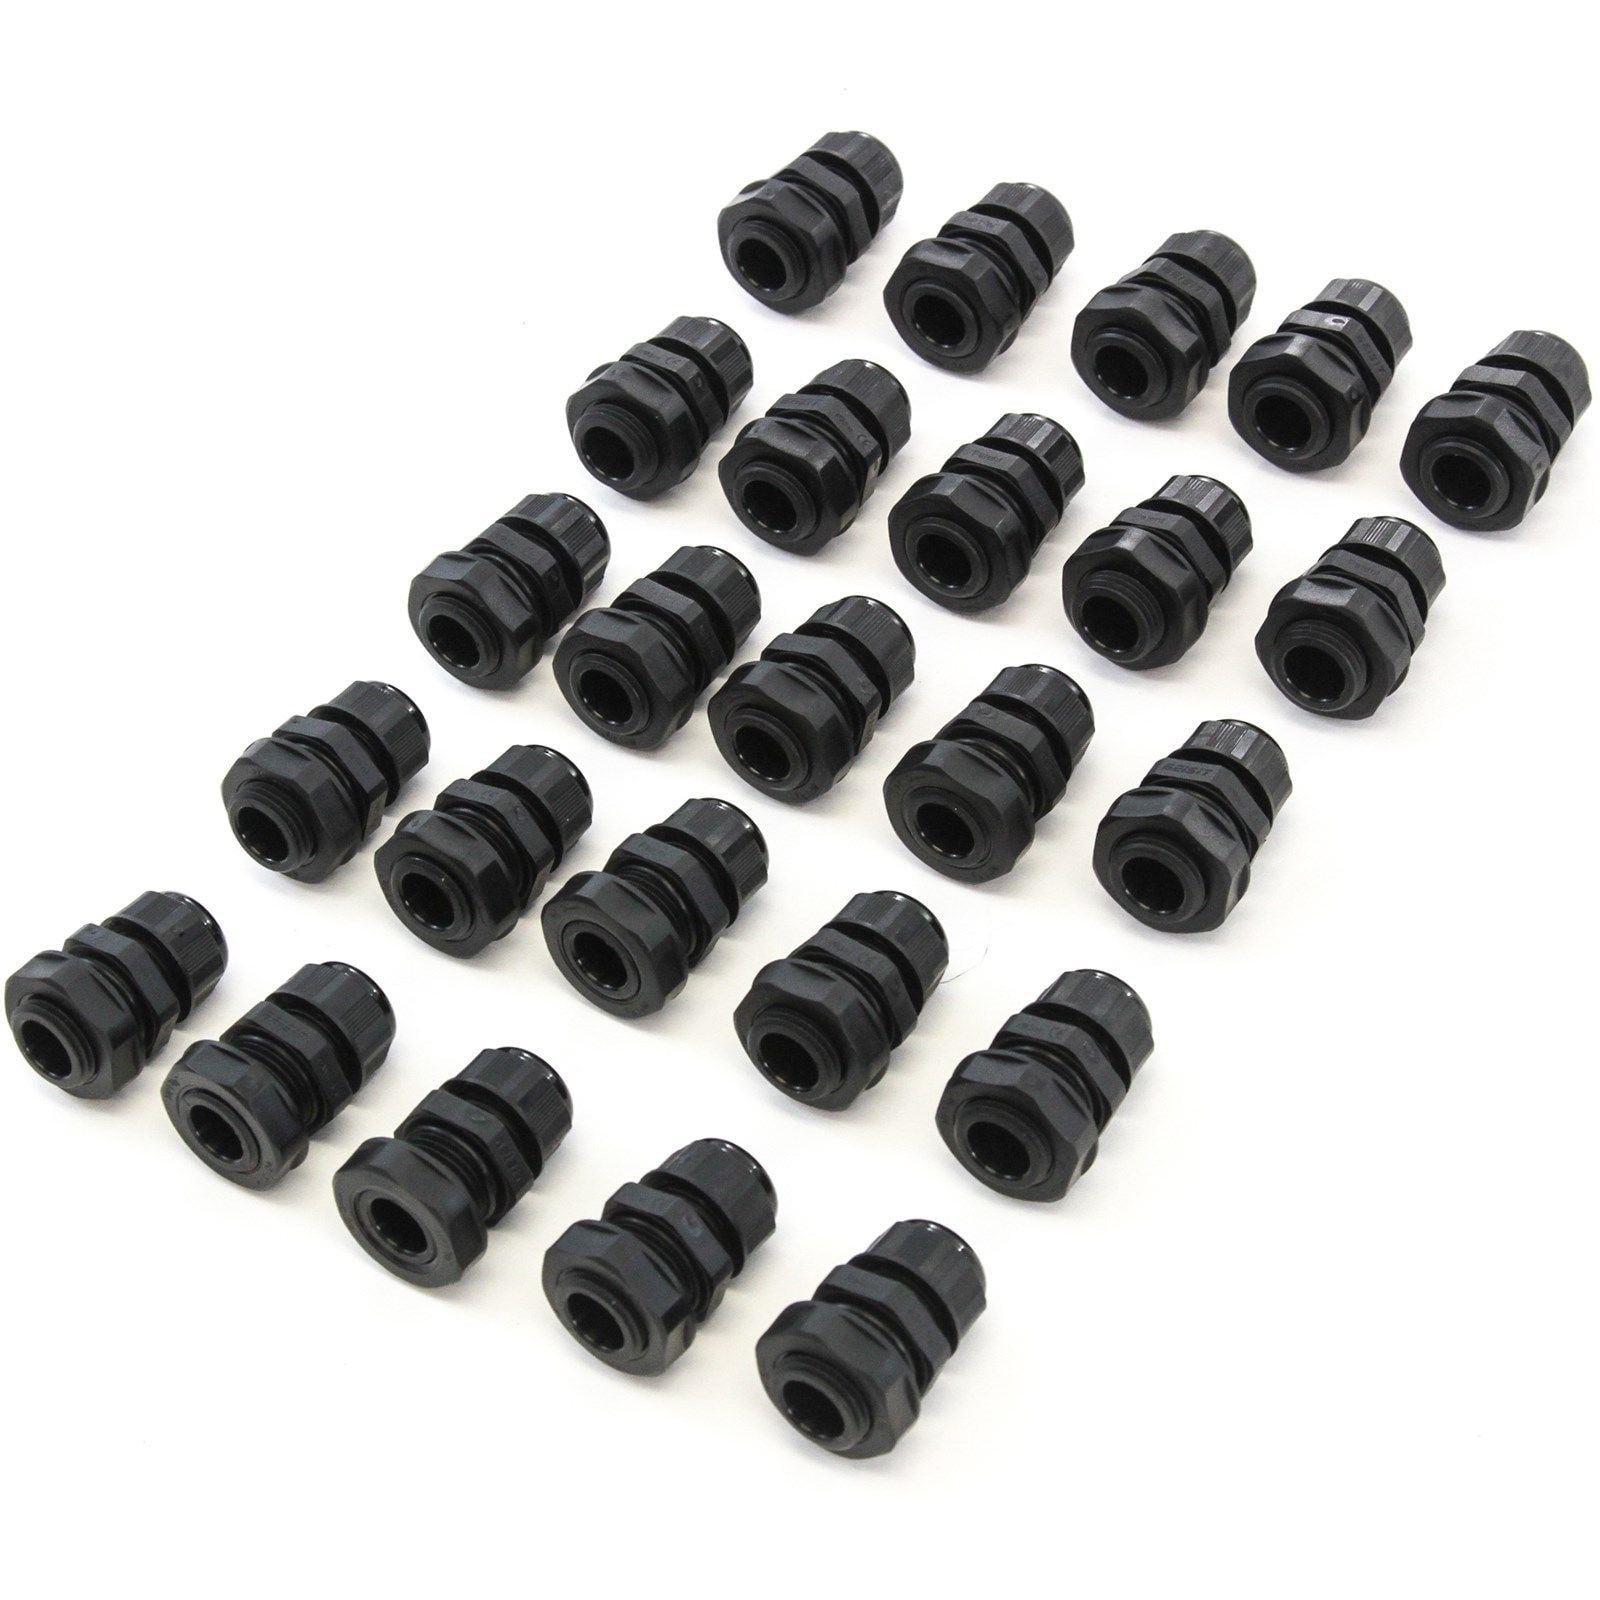 YXQ PG29 Waterproof Cable Gland Joints Adjustable Lock Nut Connector For 18-24mm Cable Plastic Black 3Pcs 